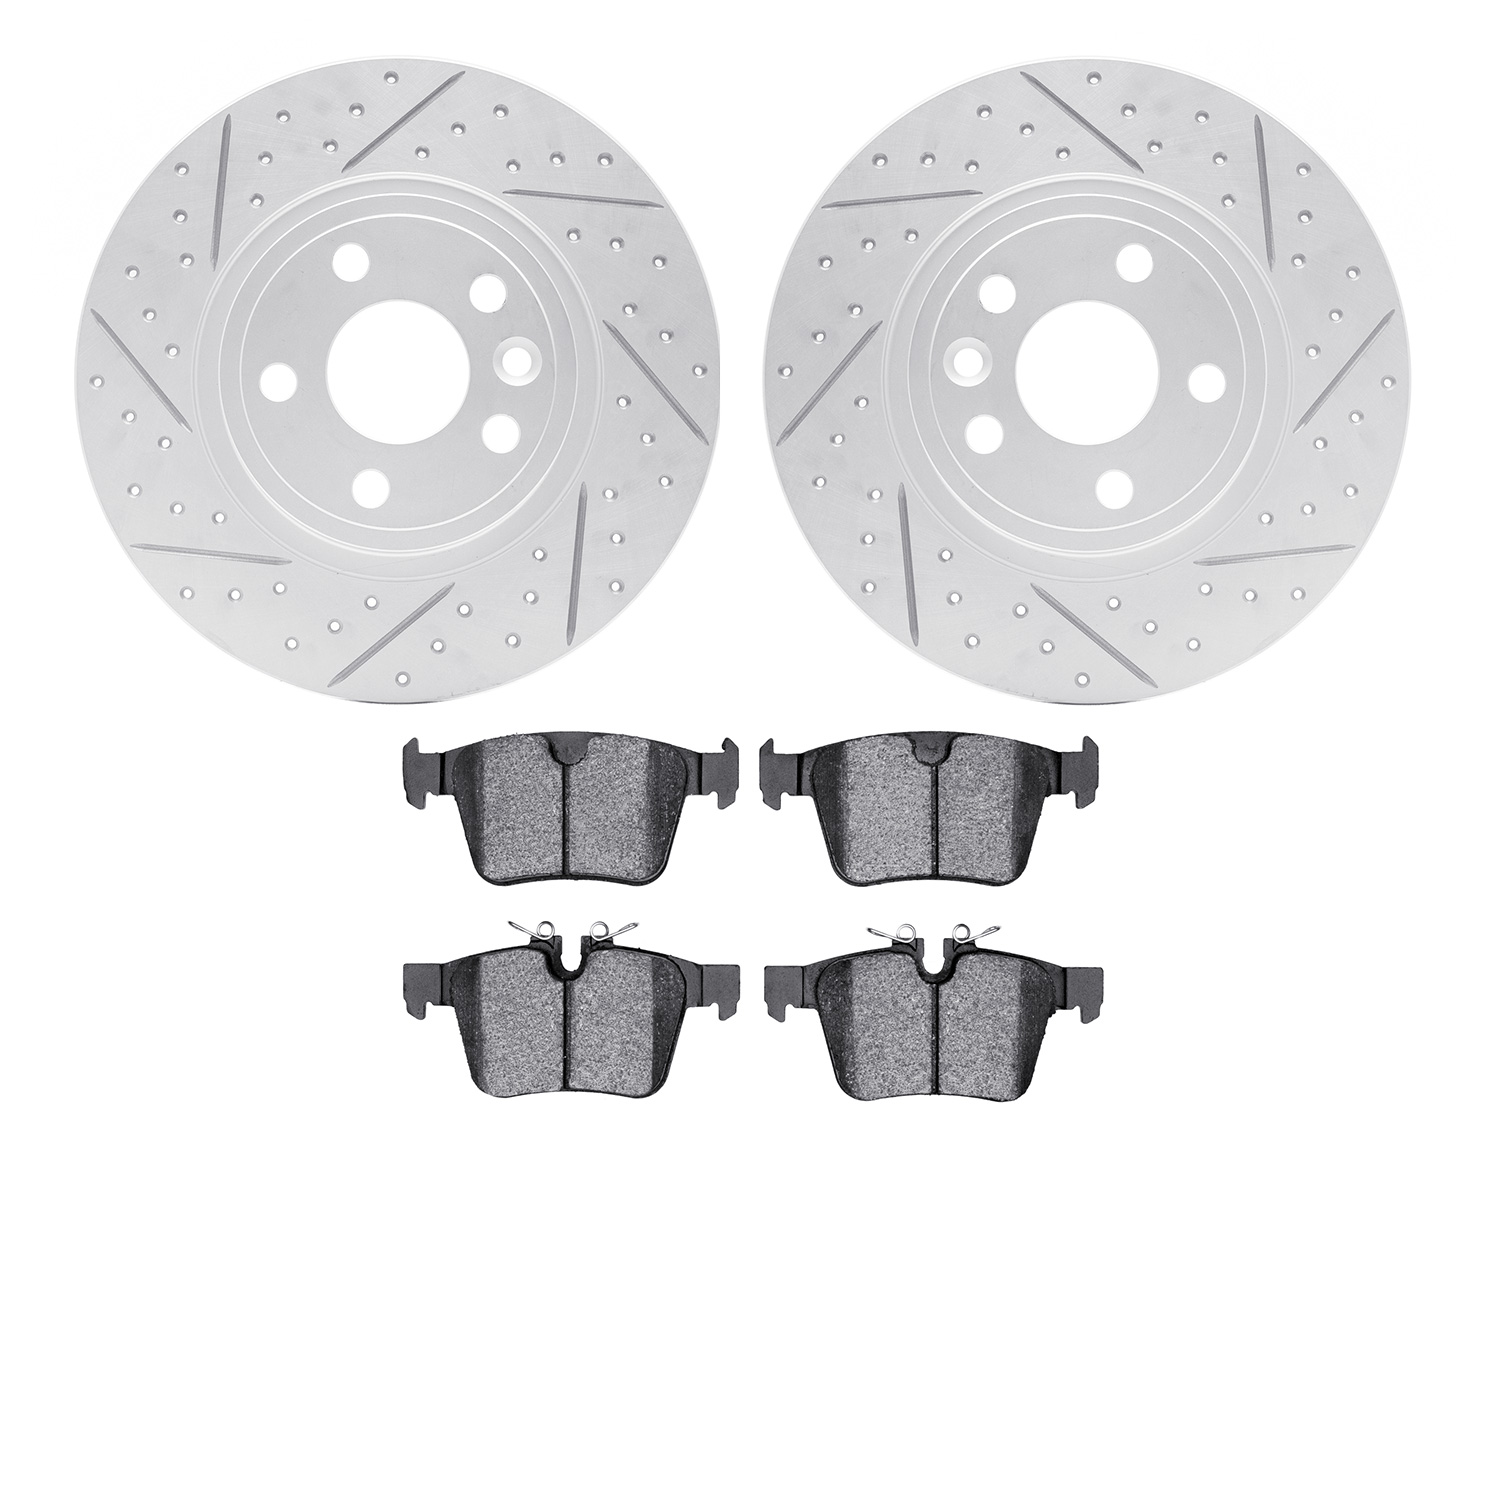 2502-11035 Geoperformance Drilled/Slotted Rotors w/5000 Advanced Brake Pads Kit, 2015-2020 Multiple Makes/Models, Position: Rear